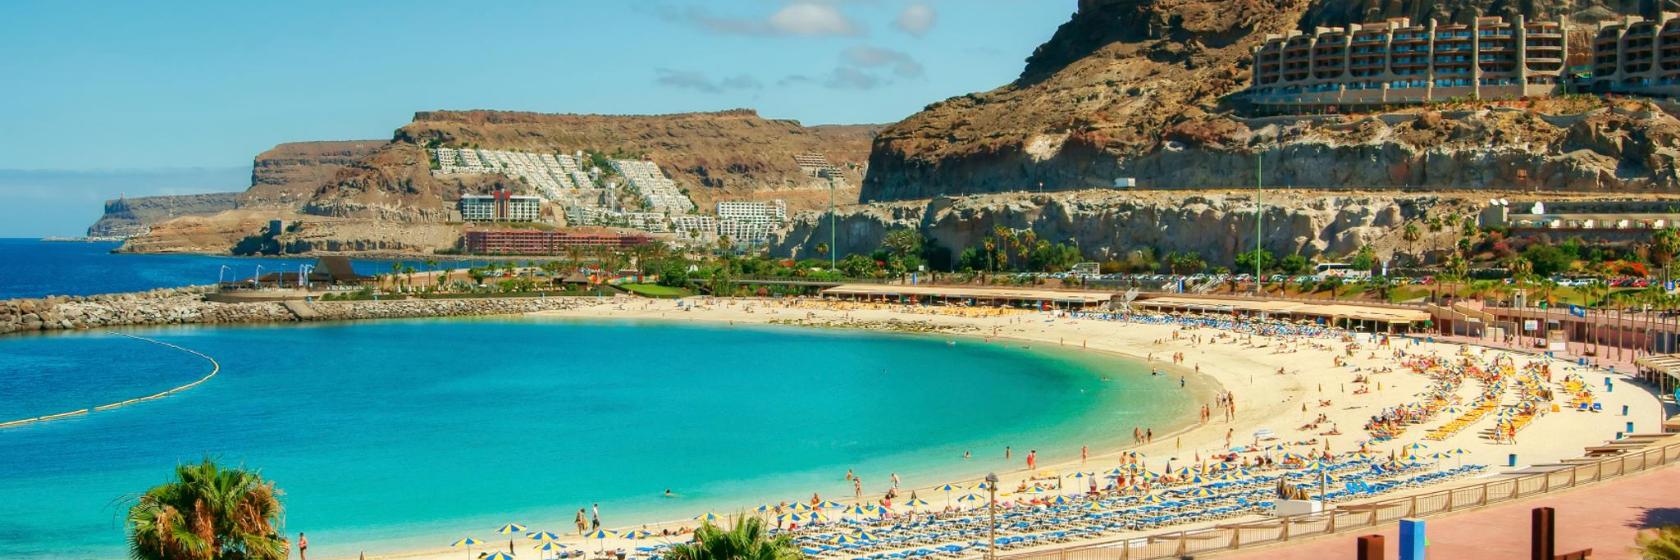 Hotels on Gran Canaria, Spain – save 15% with the best deals